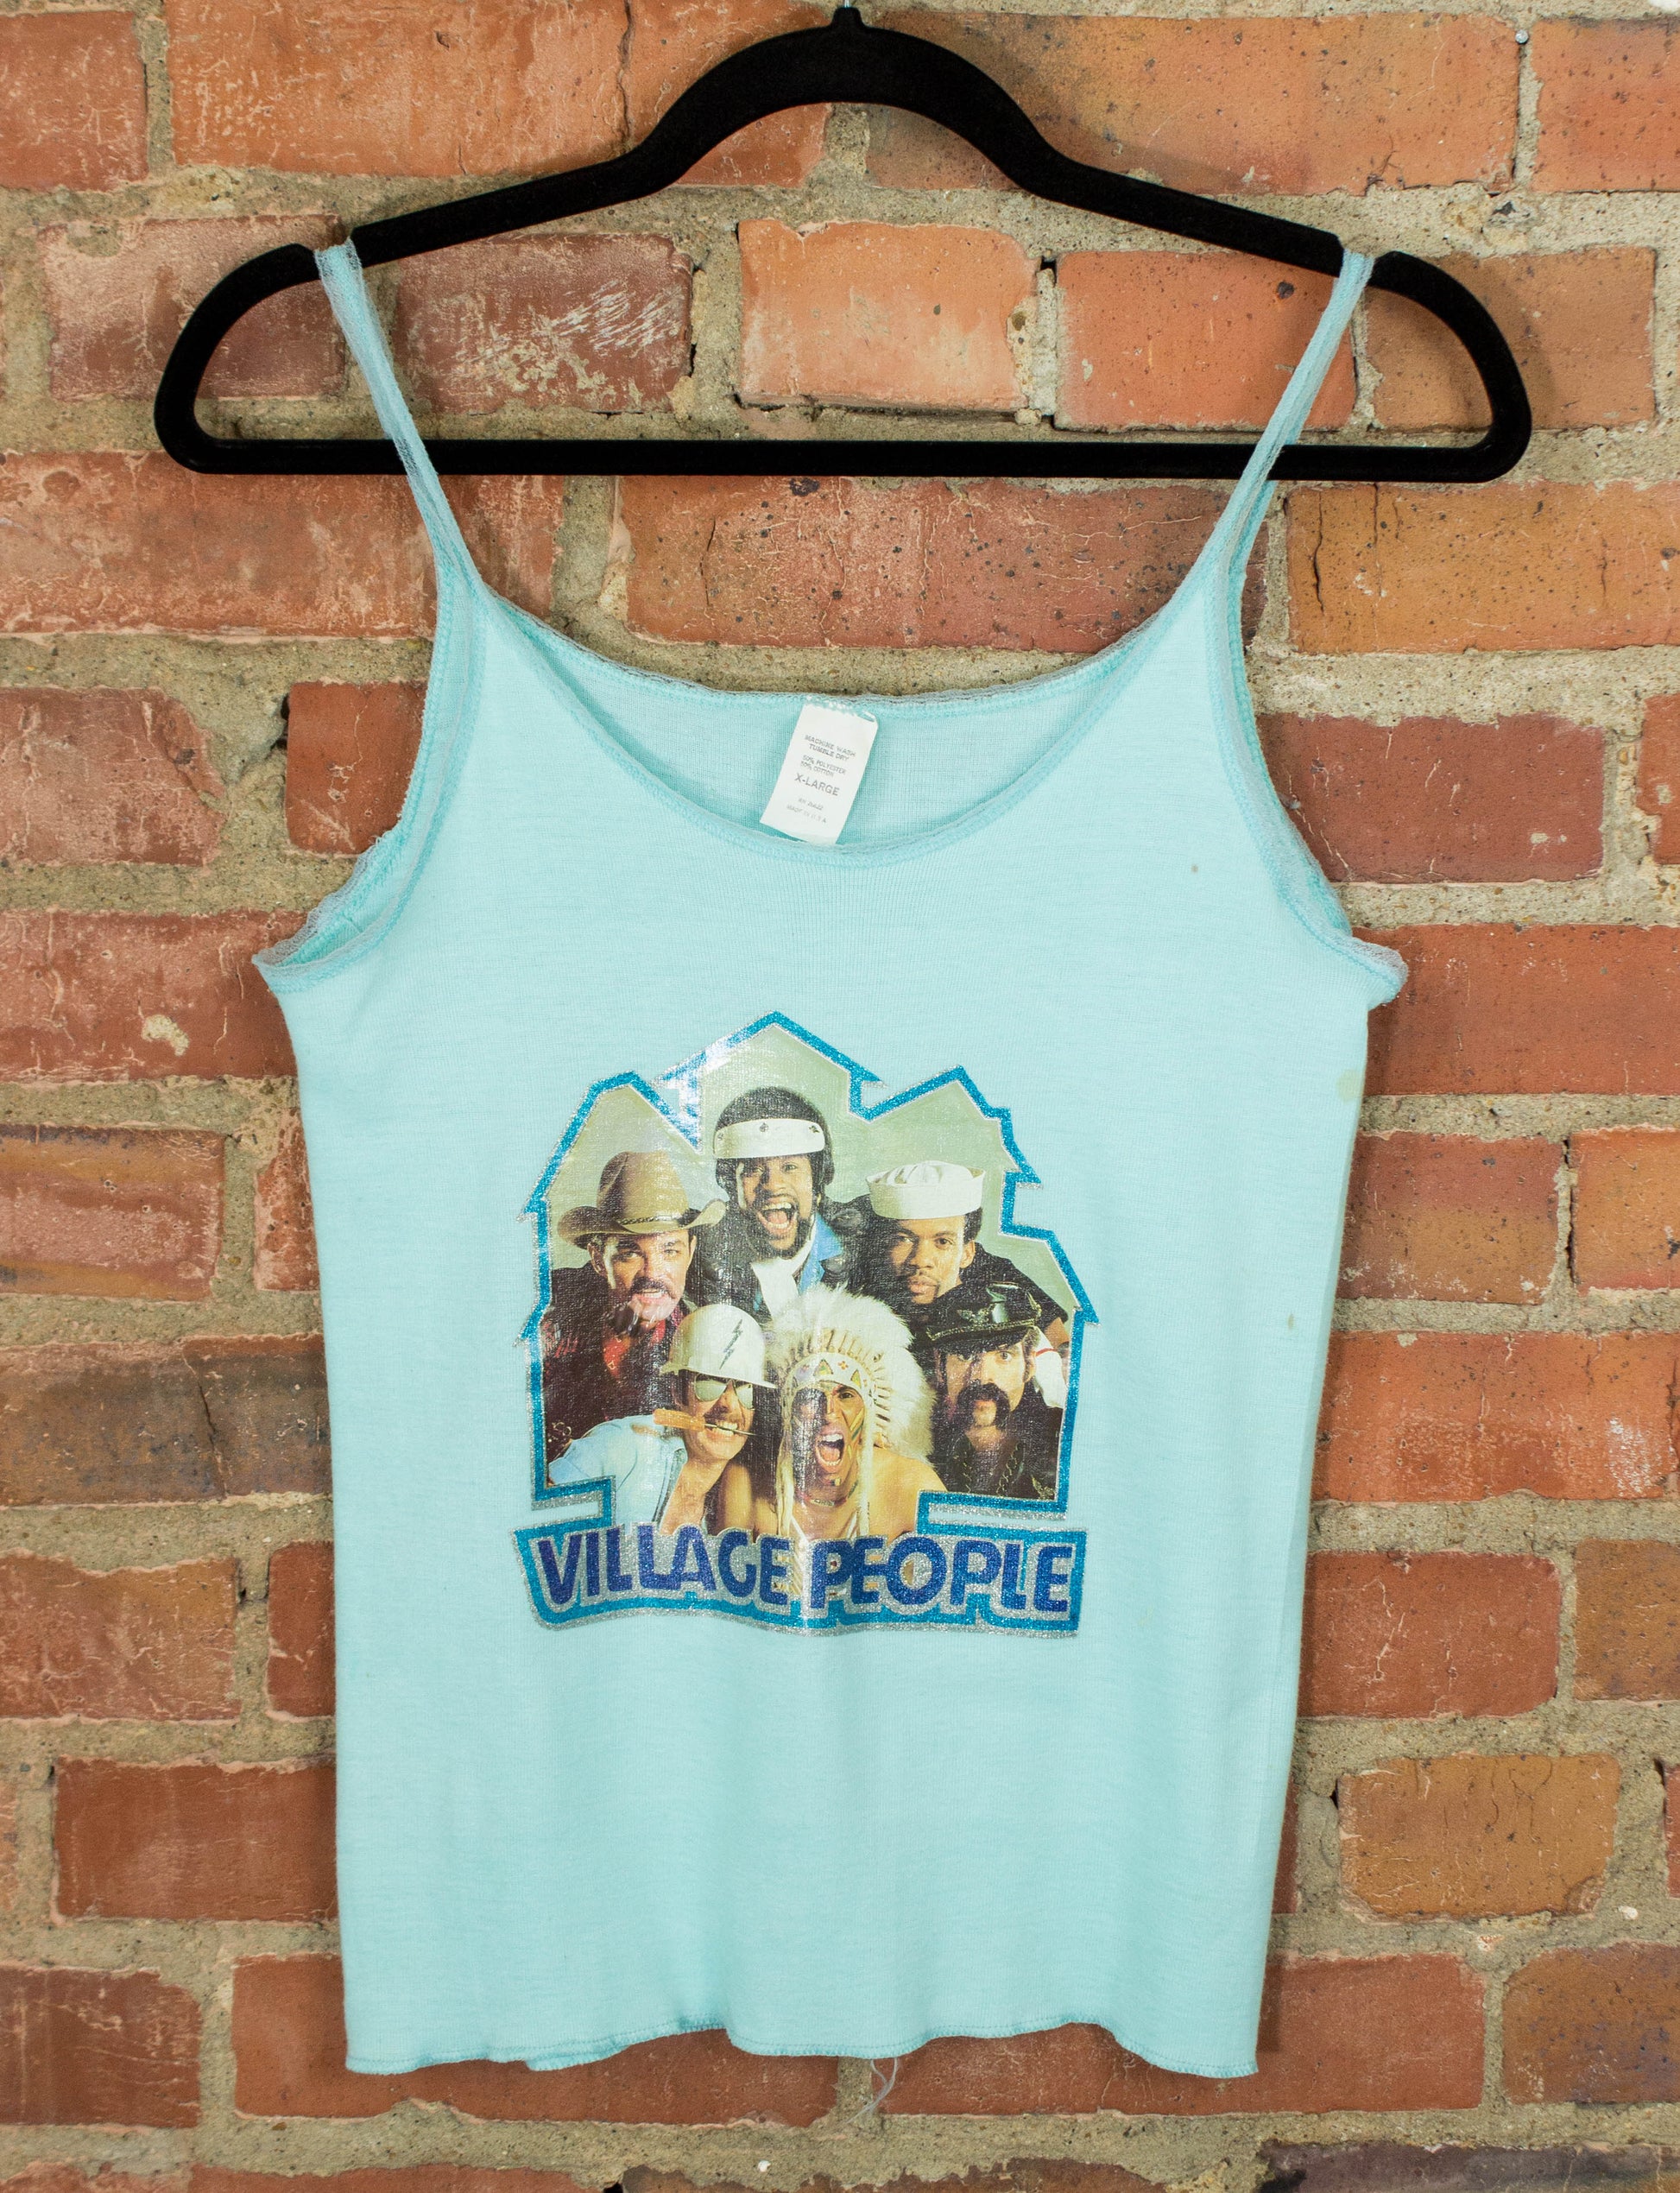 Vintage Village People Concert T Shirt 1978 Iron On Graphic Bright Blue Lace Tank Top Large